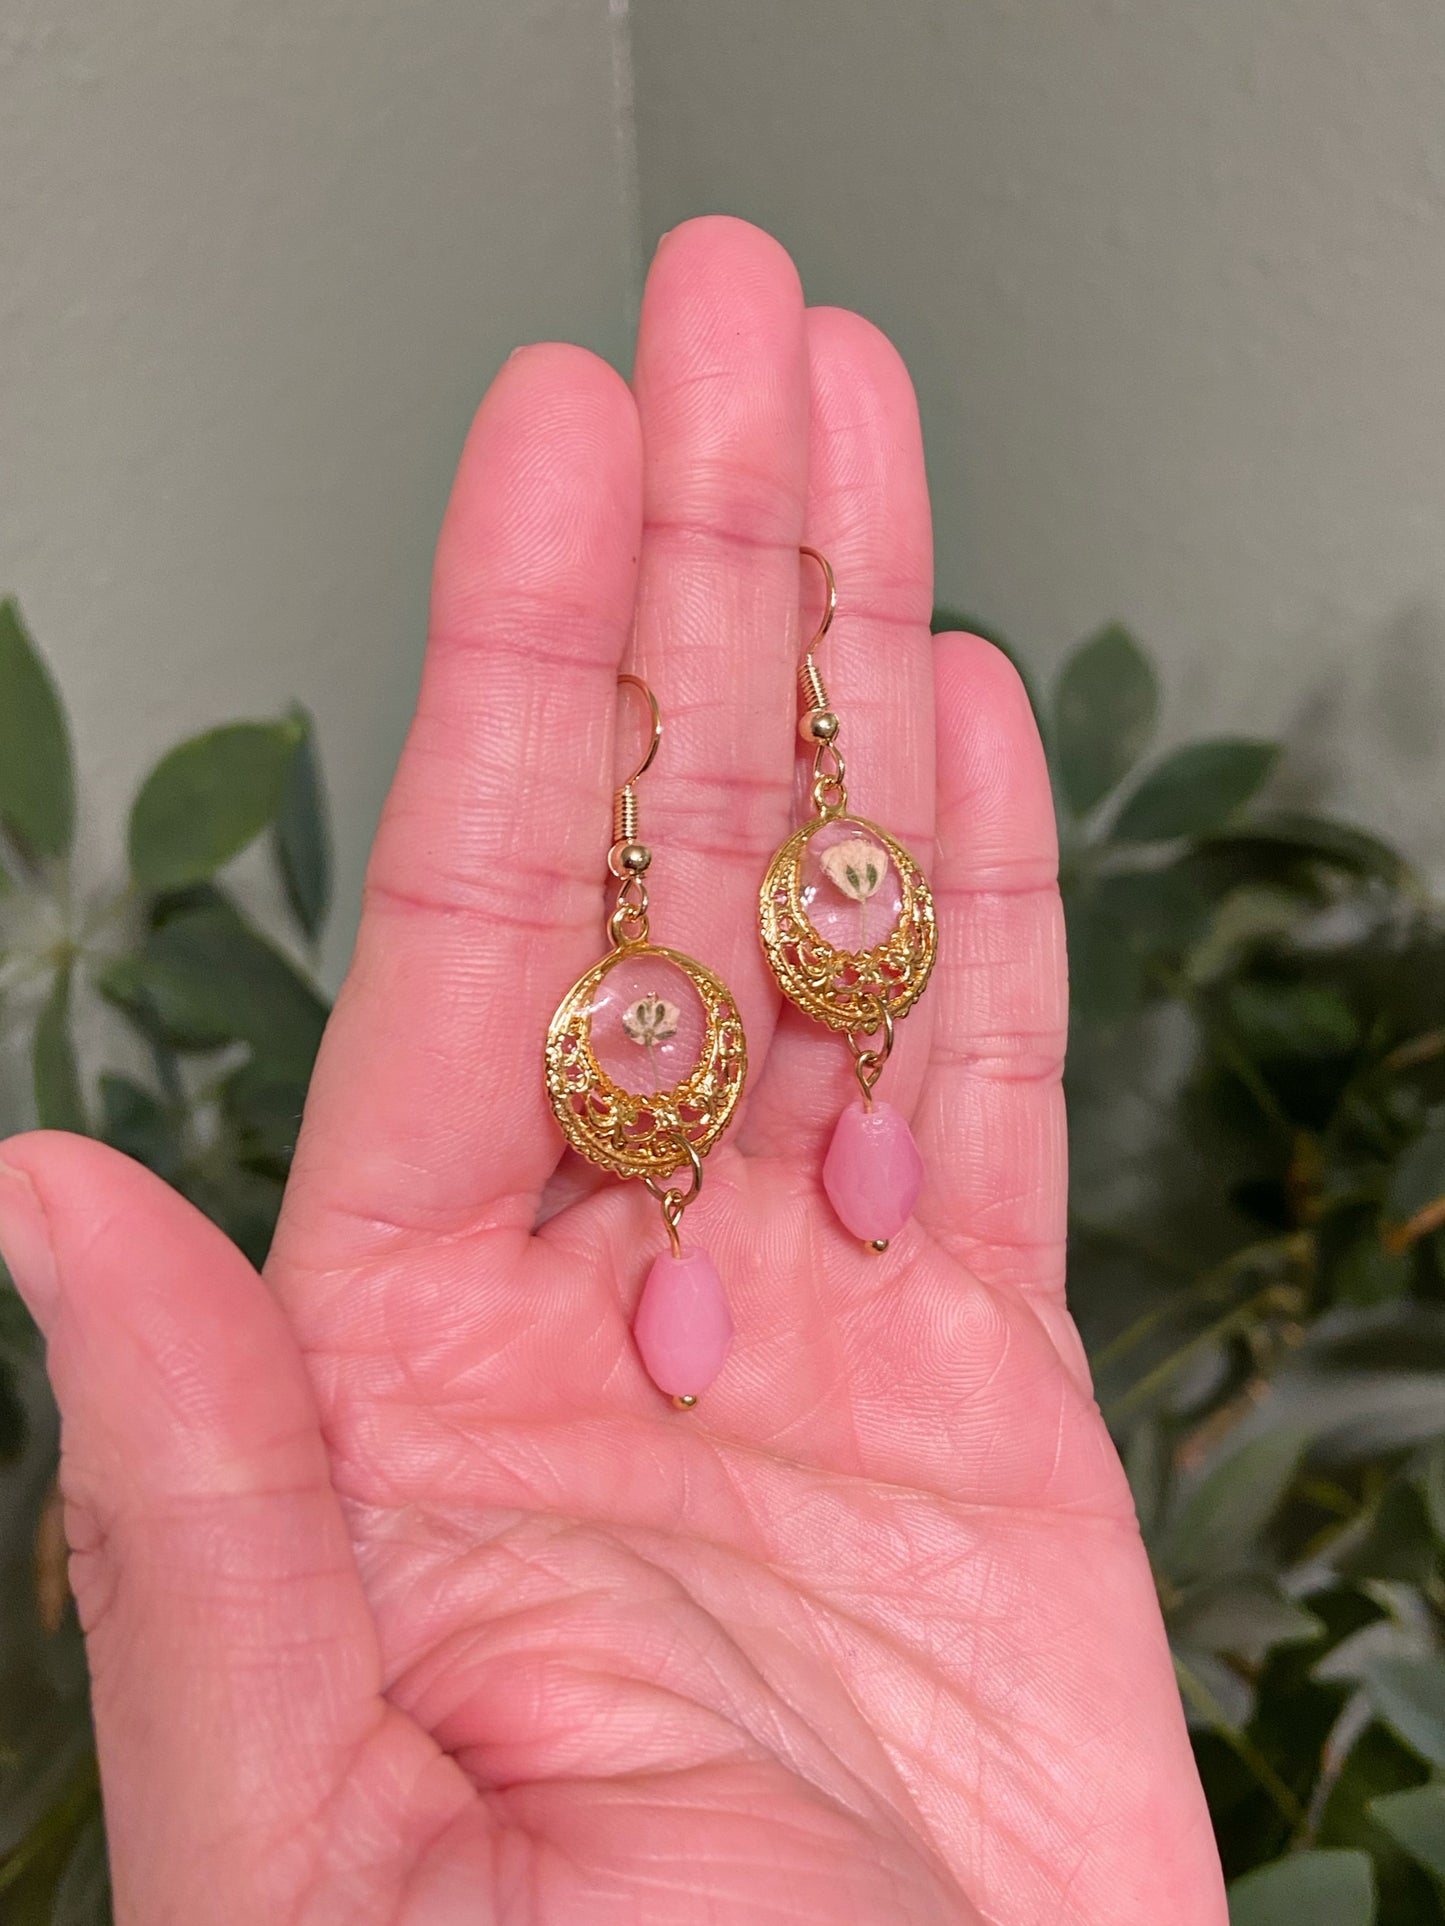 Baby's Breath - Vintage style open gold circle earrings with real pressed flowers and milky pink glass faceted bead dangle